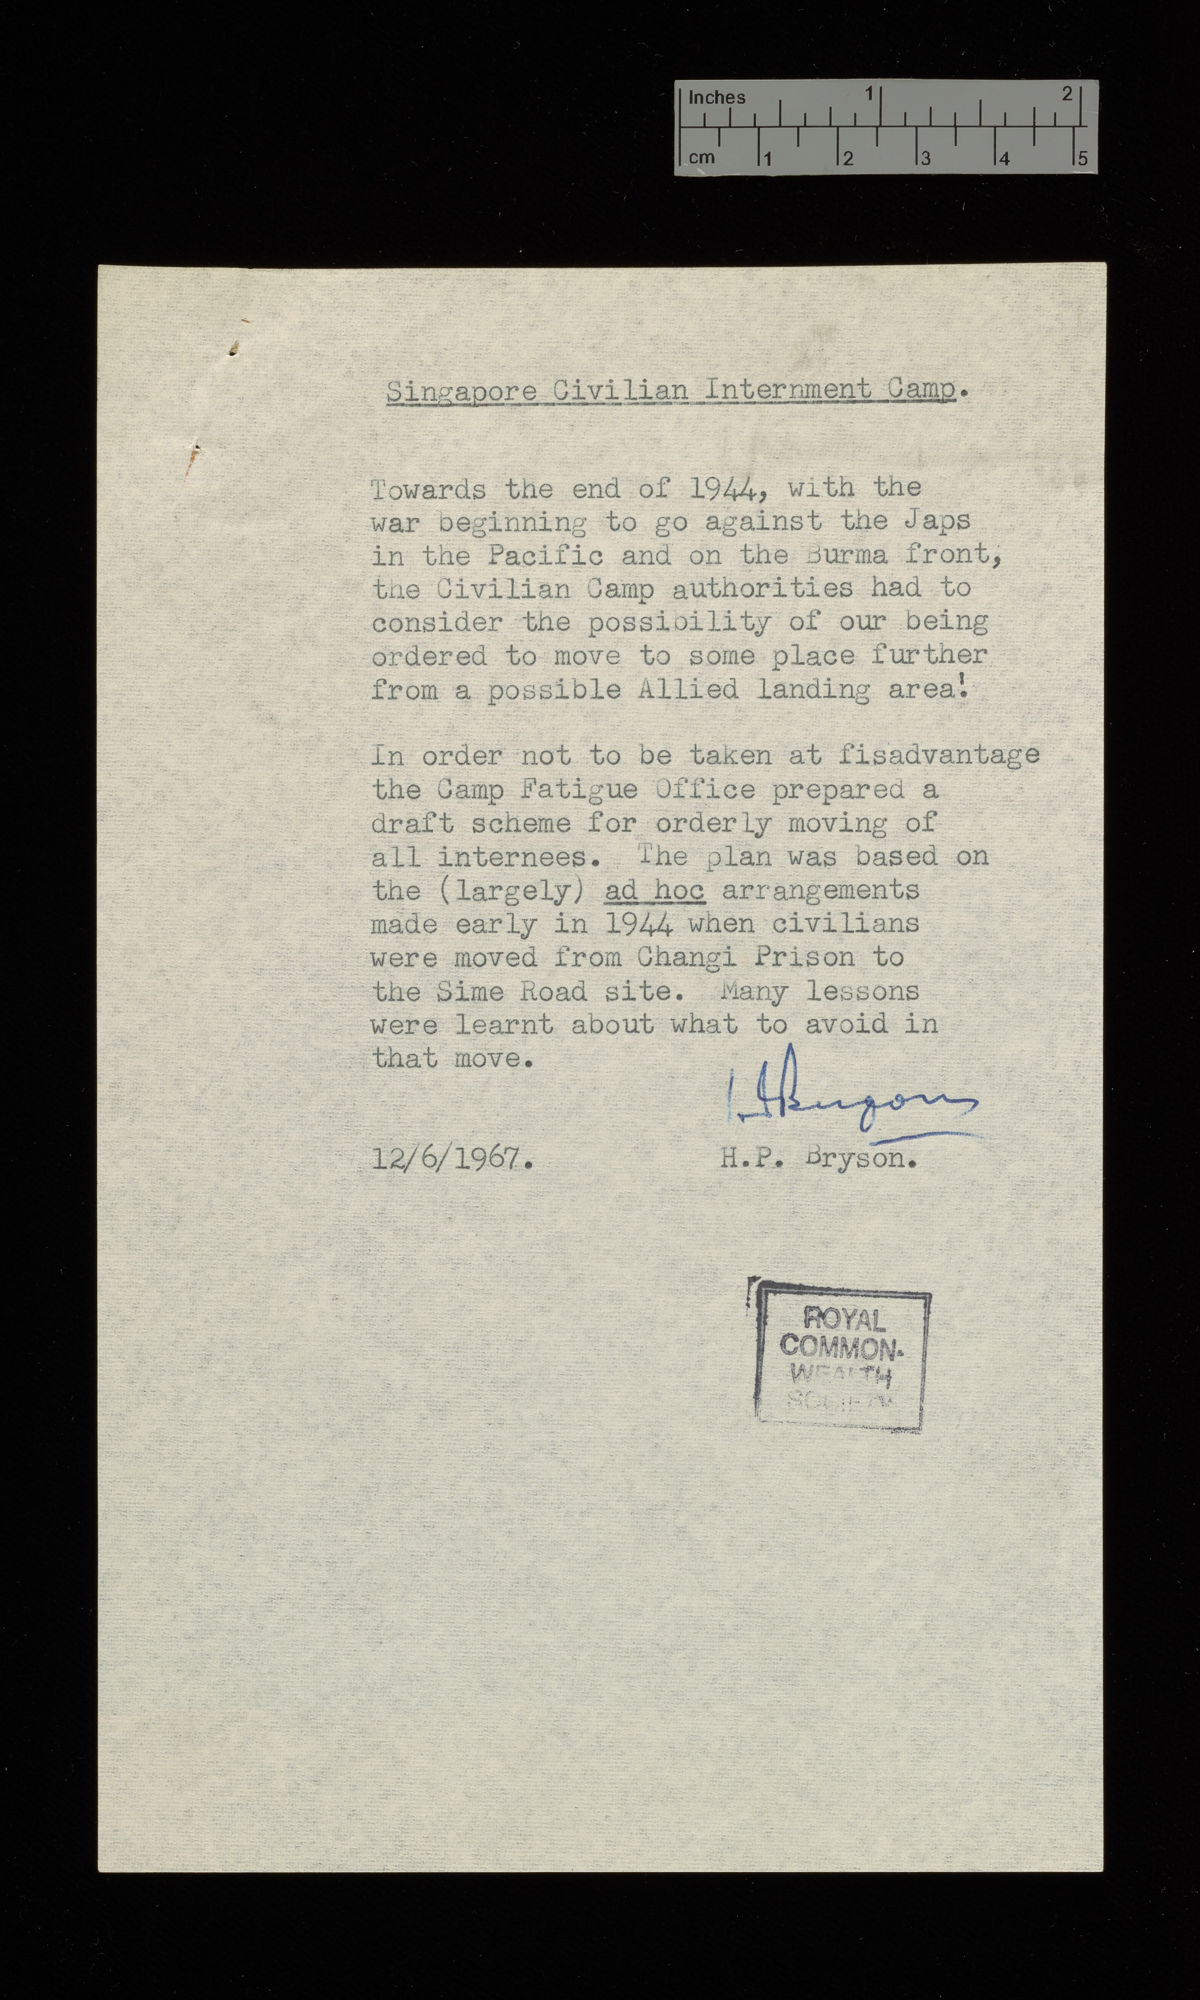 Letters concerning Changi and Sime Road civilian internment camps